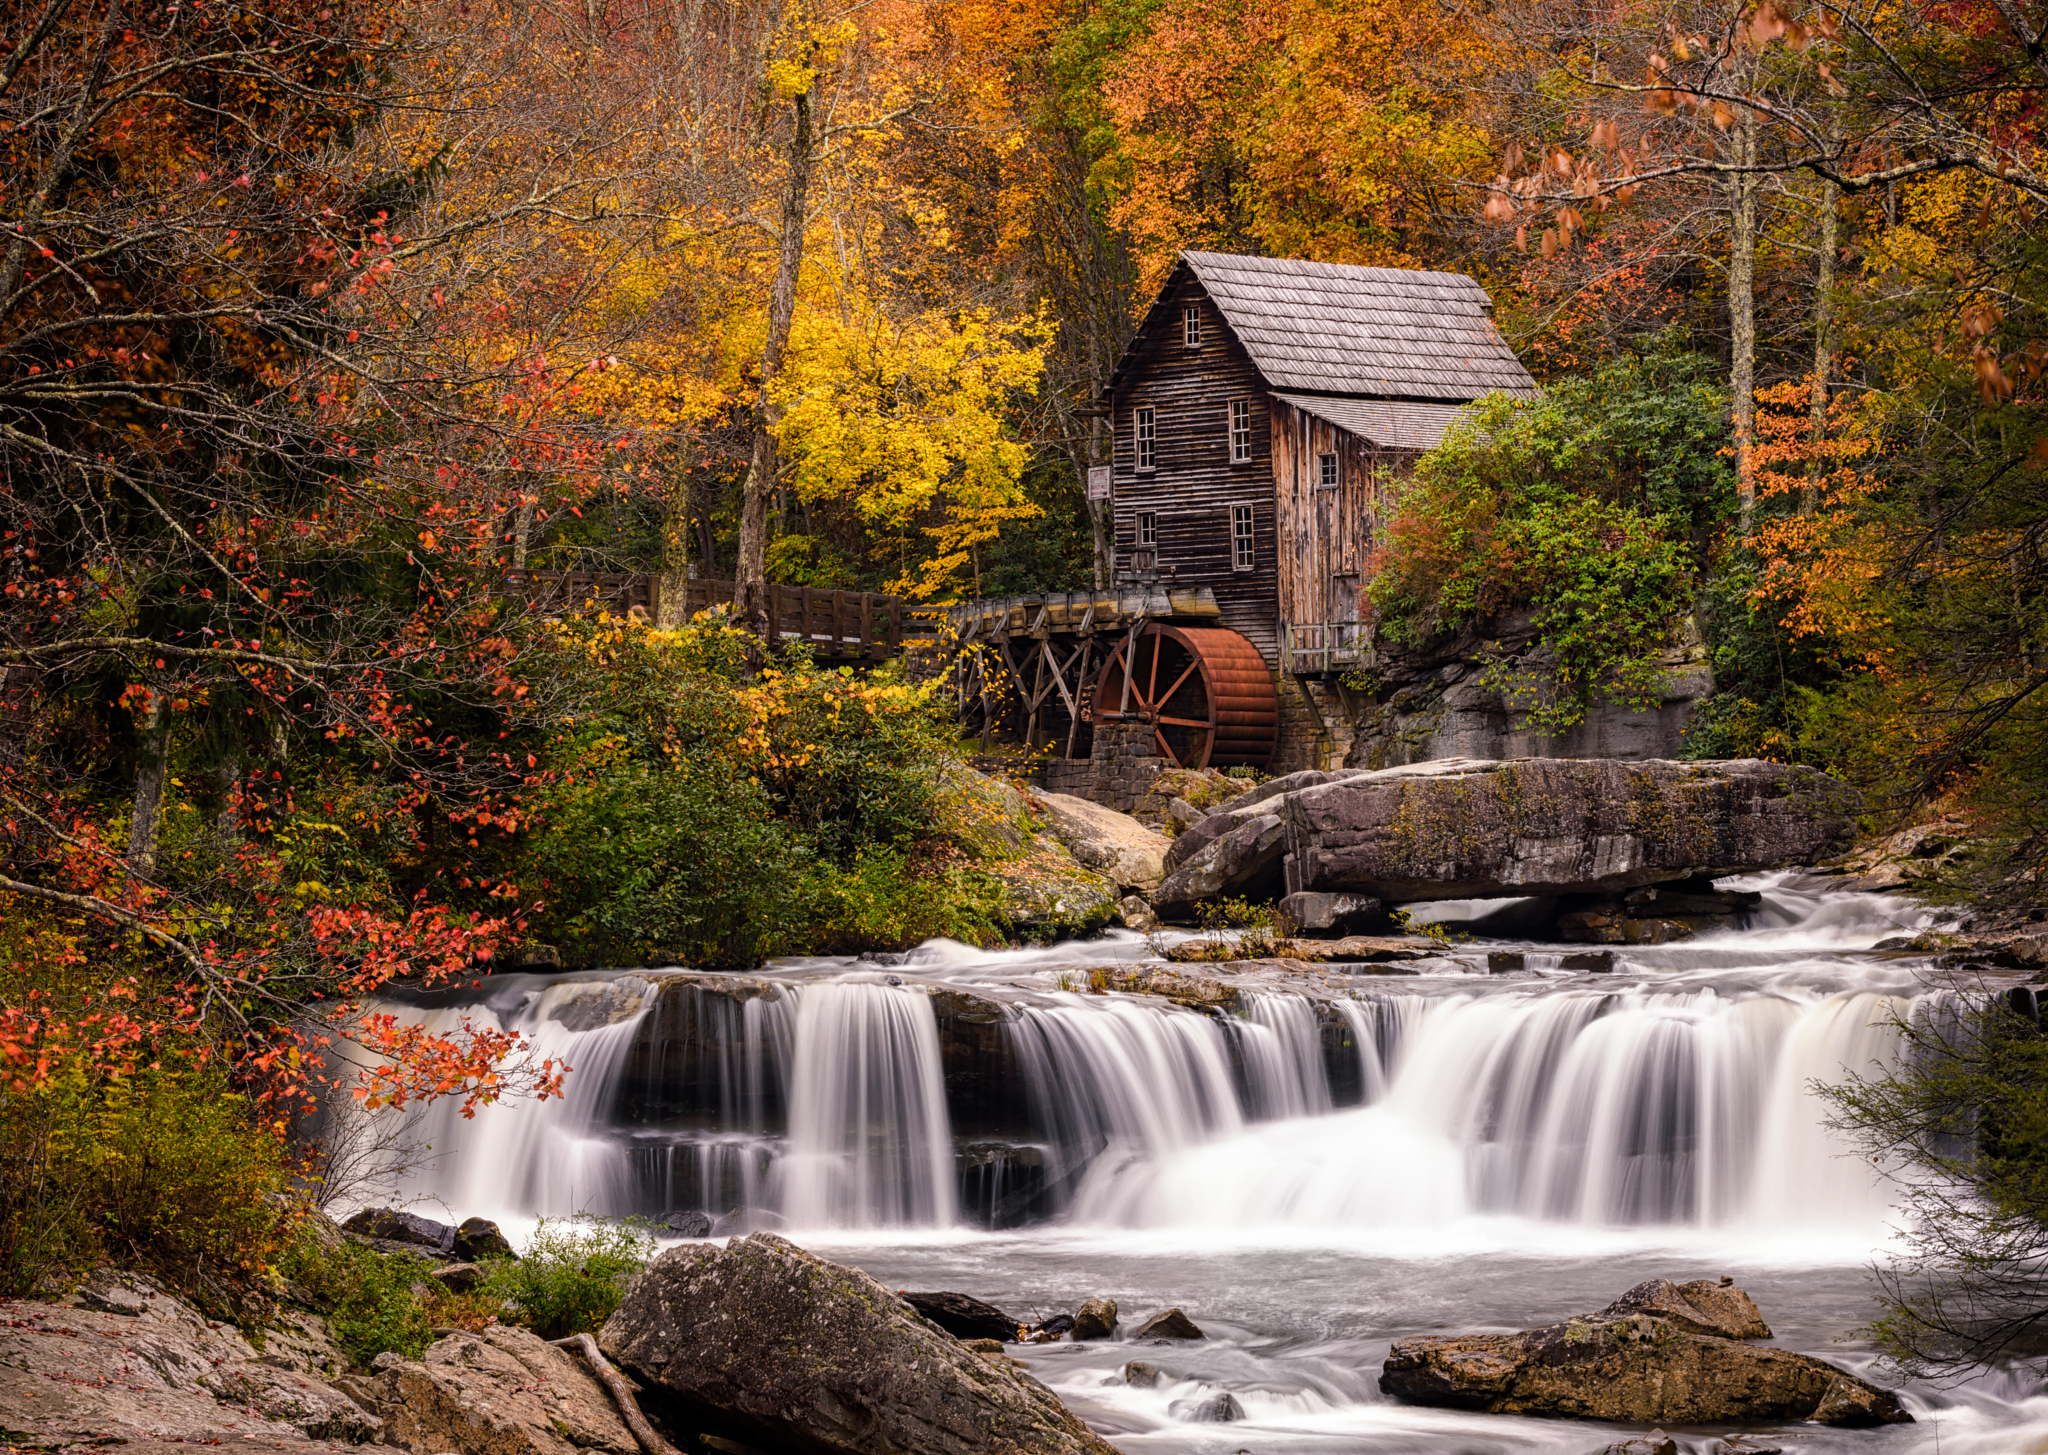 man made, watermill, forest, mill, river, waterfall